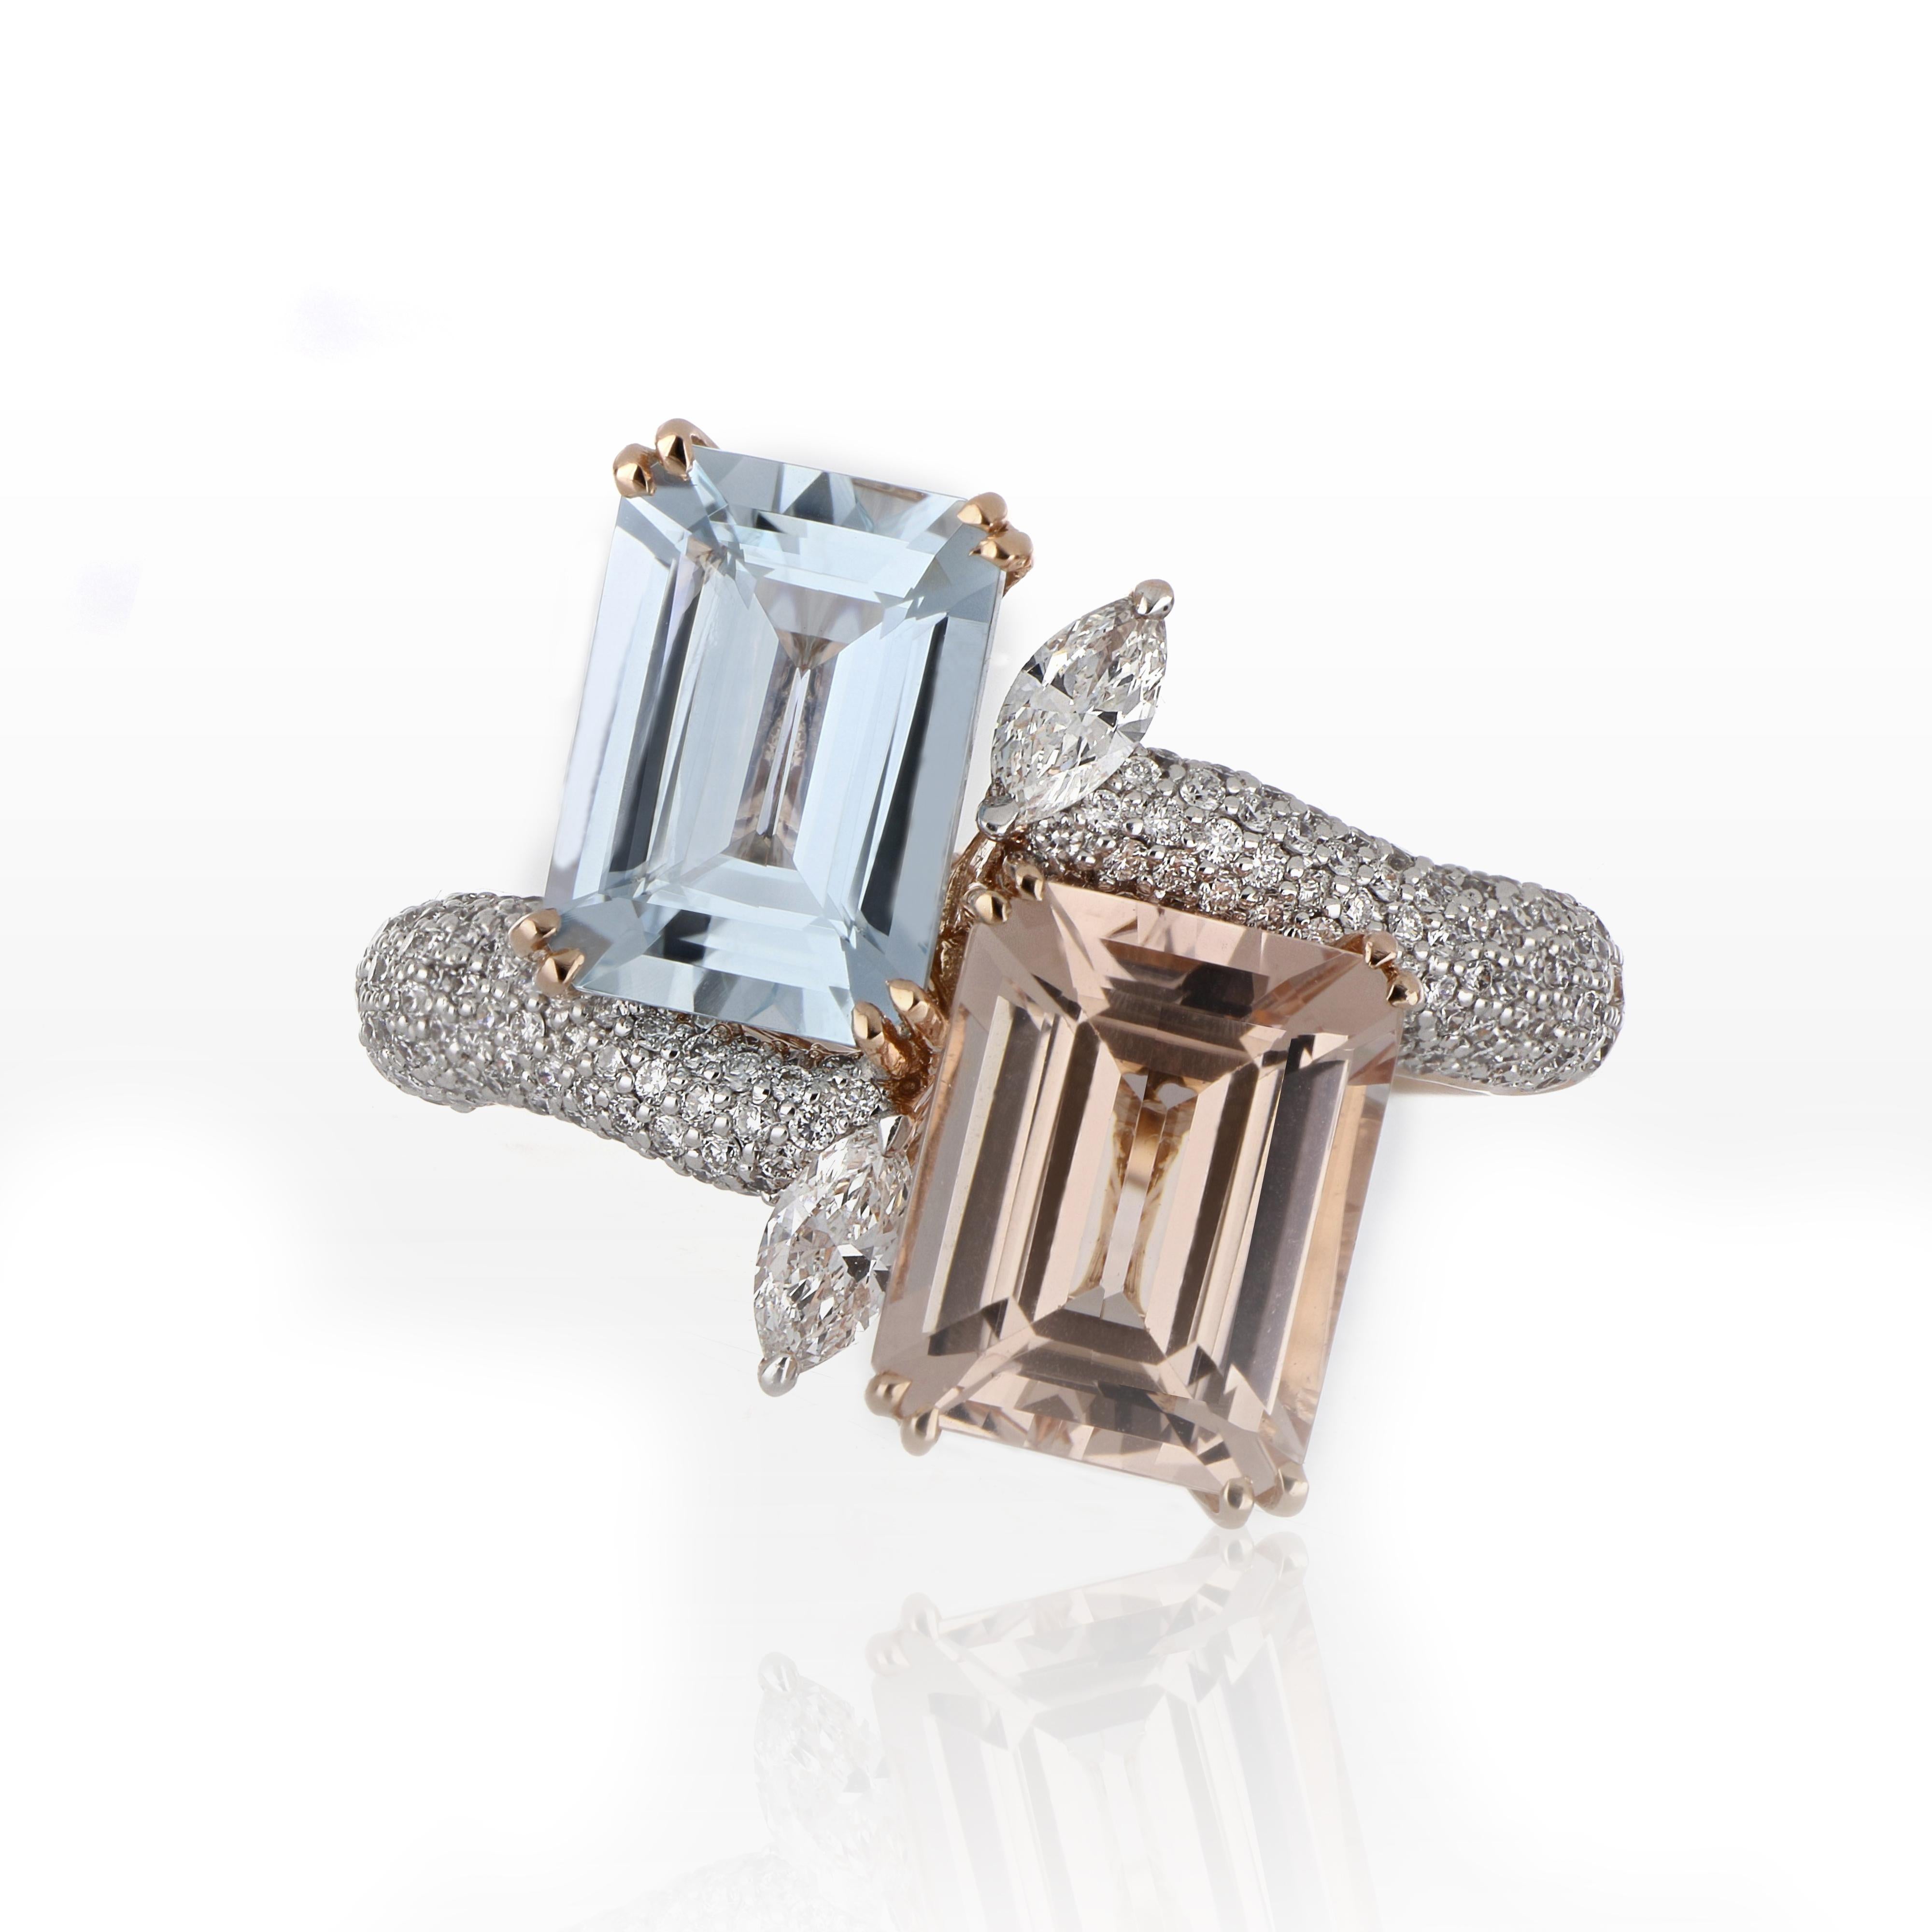 Elegant and exquisitely detailed Cocktail 14K Ring, centre set with 3.16 Cts. Octagon Morganite and 2.27 Cts. Octagon Aquamarine. Surrounded and enhanced on shank with Diamonds, weighing approx. 0.83 ct. Beautifully Hand crafted in 14 Karat Rose